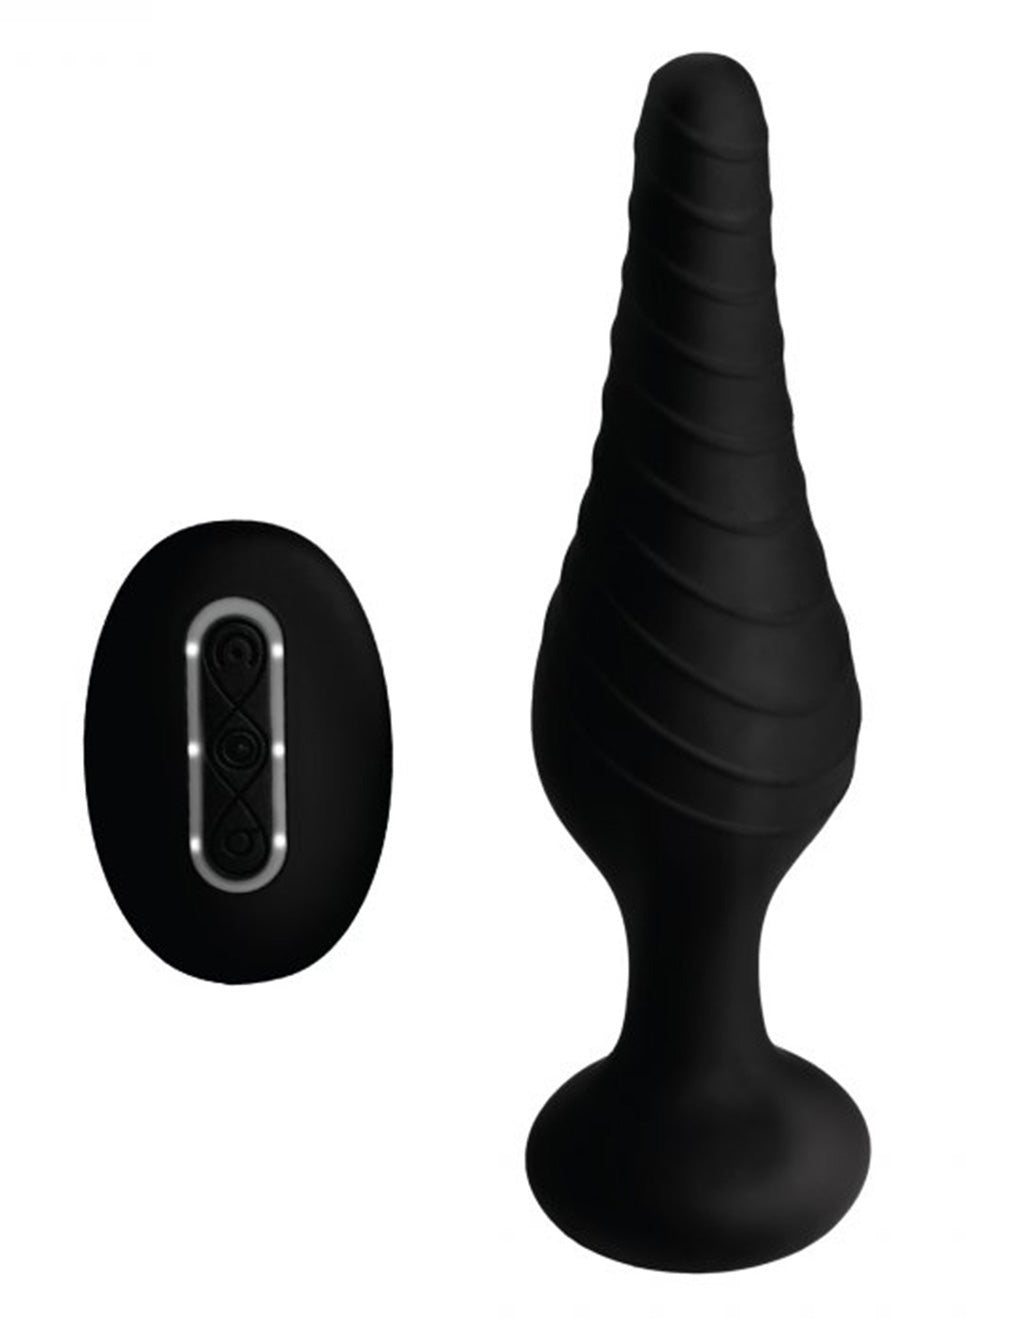 Under Control Vibrating Anal Plug with Wireless Remote Control- With remote